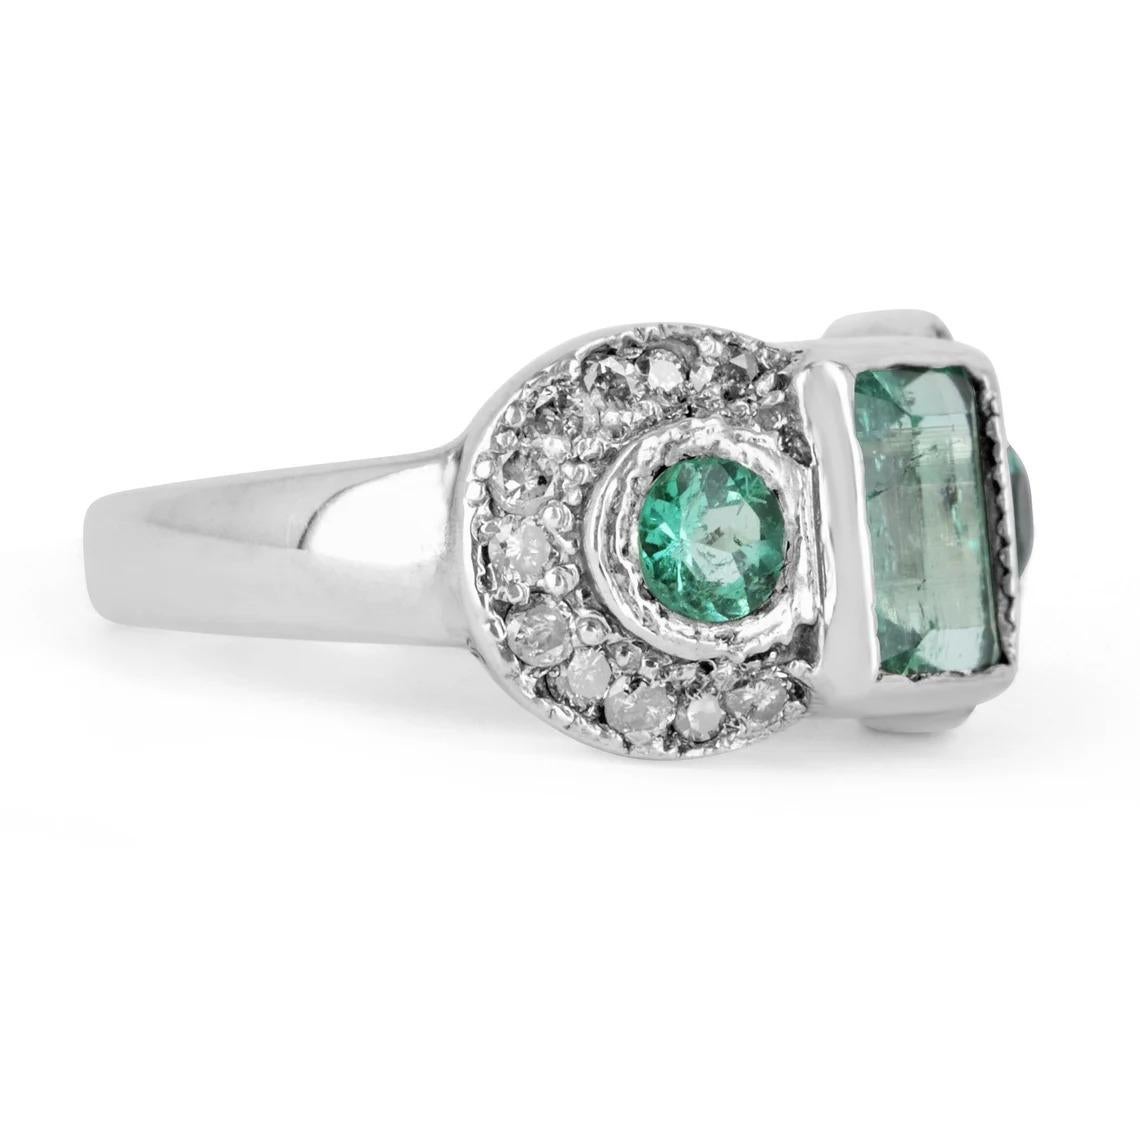 Displayed is a 2.22tcw vintage Colombian emerald and diamond ring. This is a perfect, three-stone statement ring. The emeralds are of good, varying quality and are handset in a 14K white gold bezel setting. The bluish-green color is only recognized